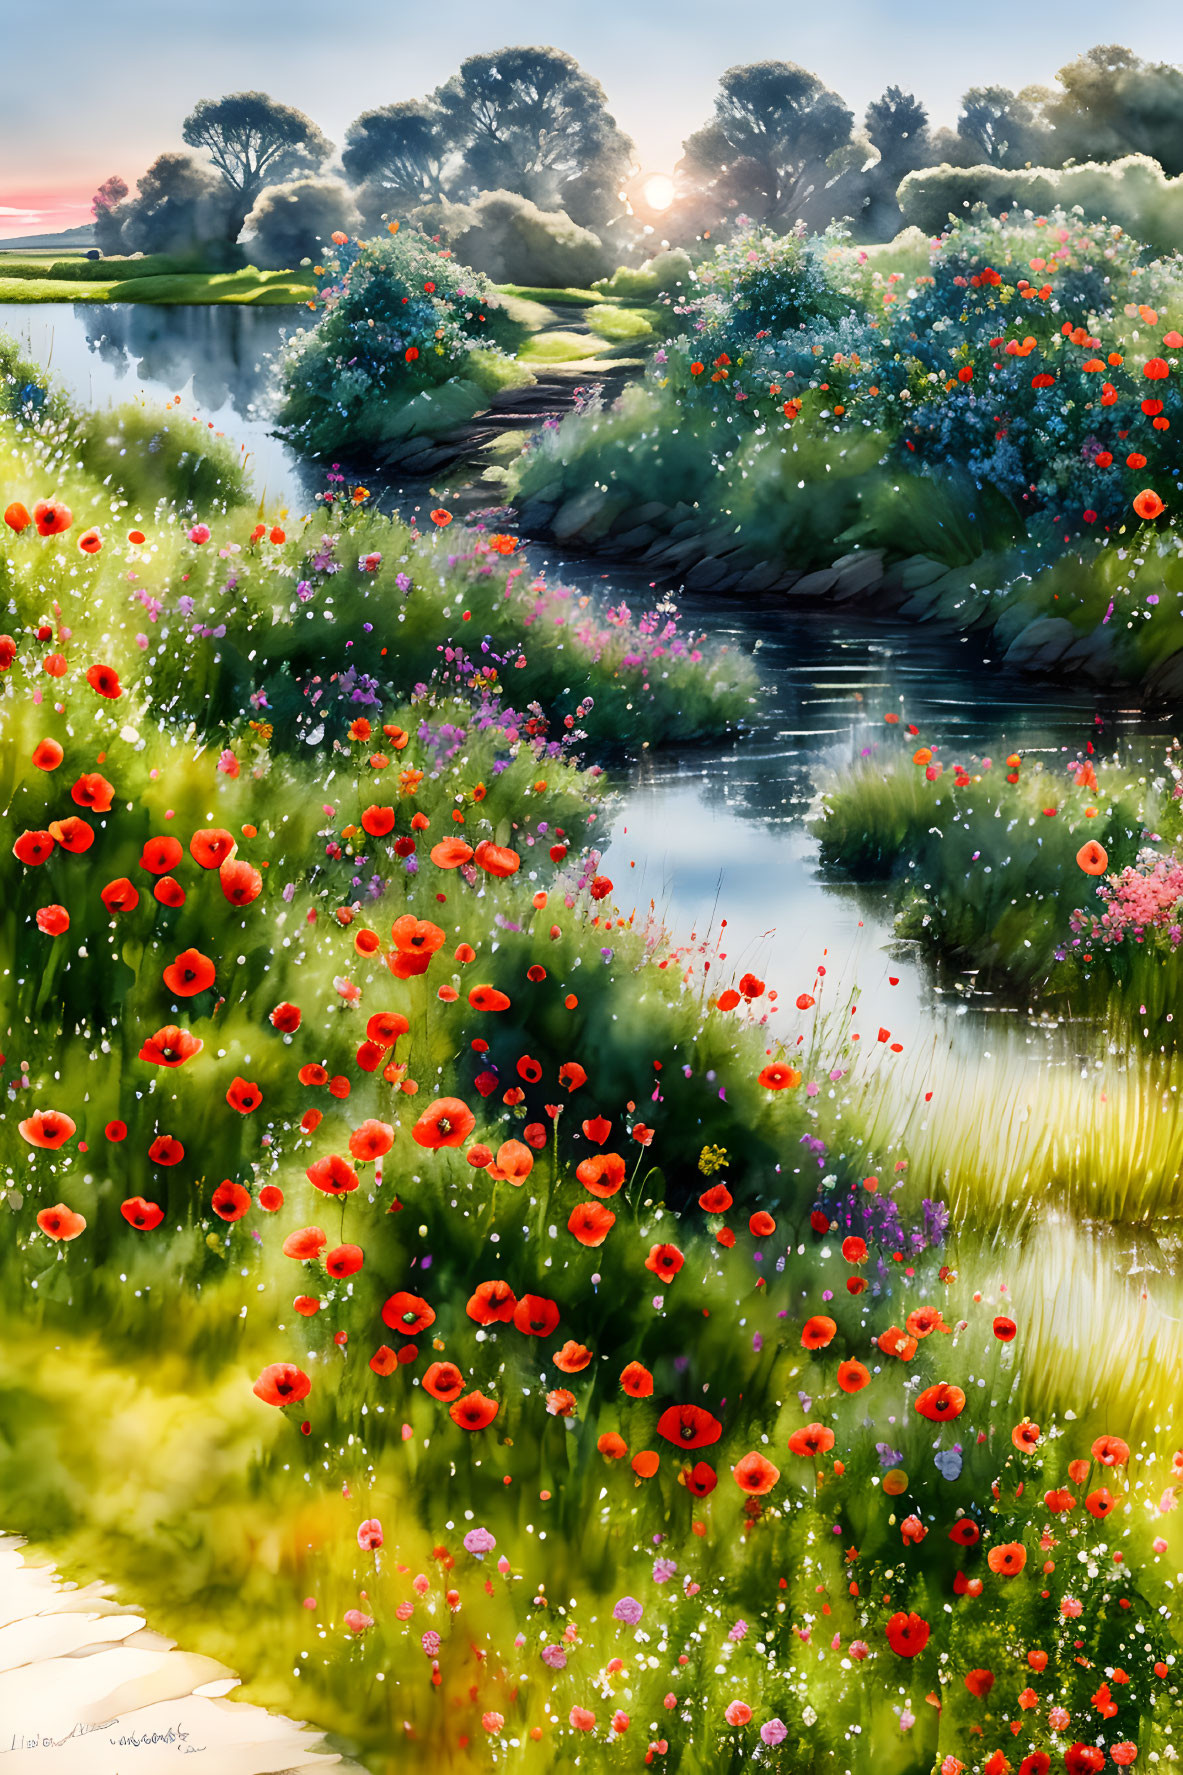 Colorful painting of meadow with red poppies, stream, and trees under sunny sky